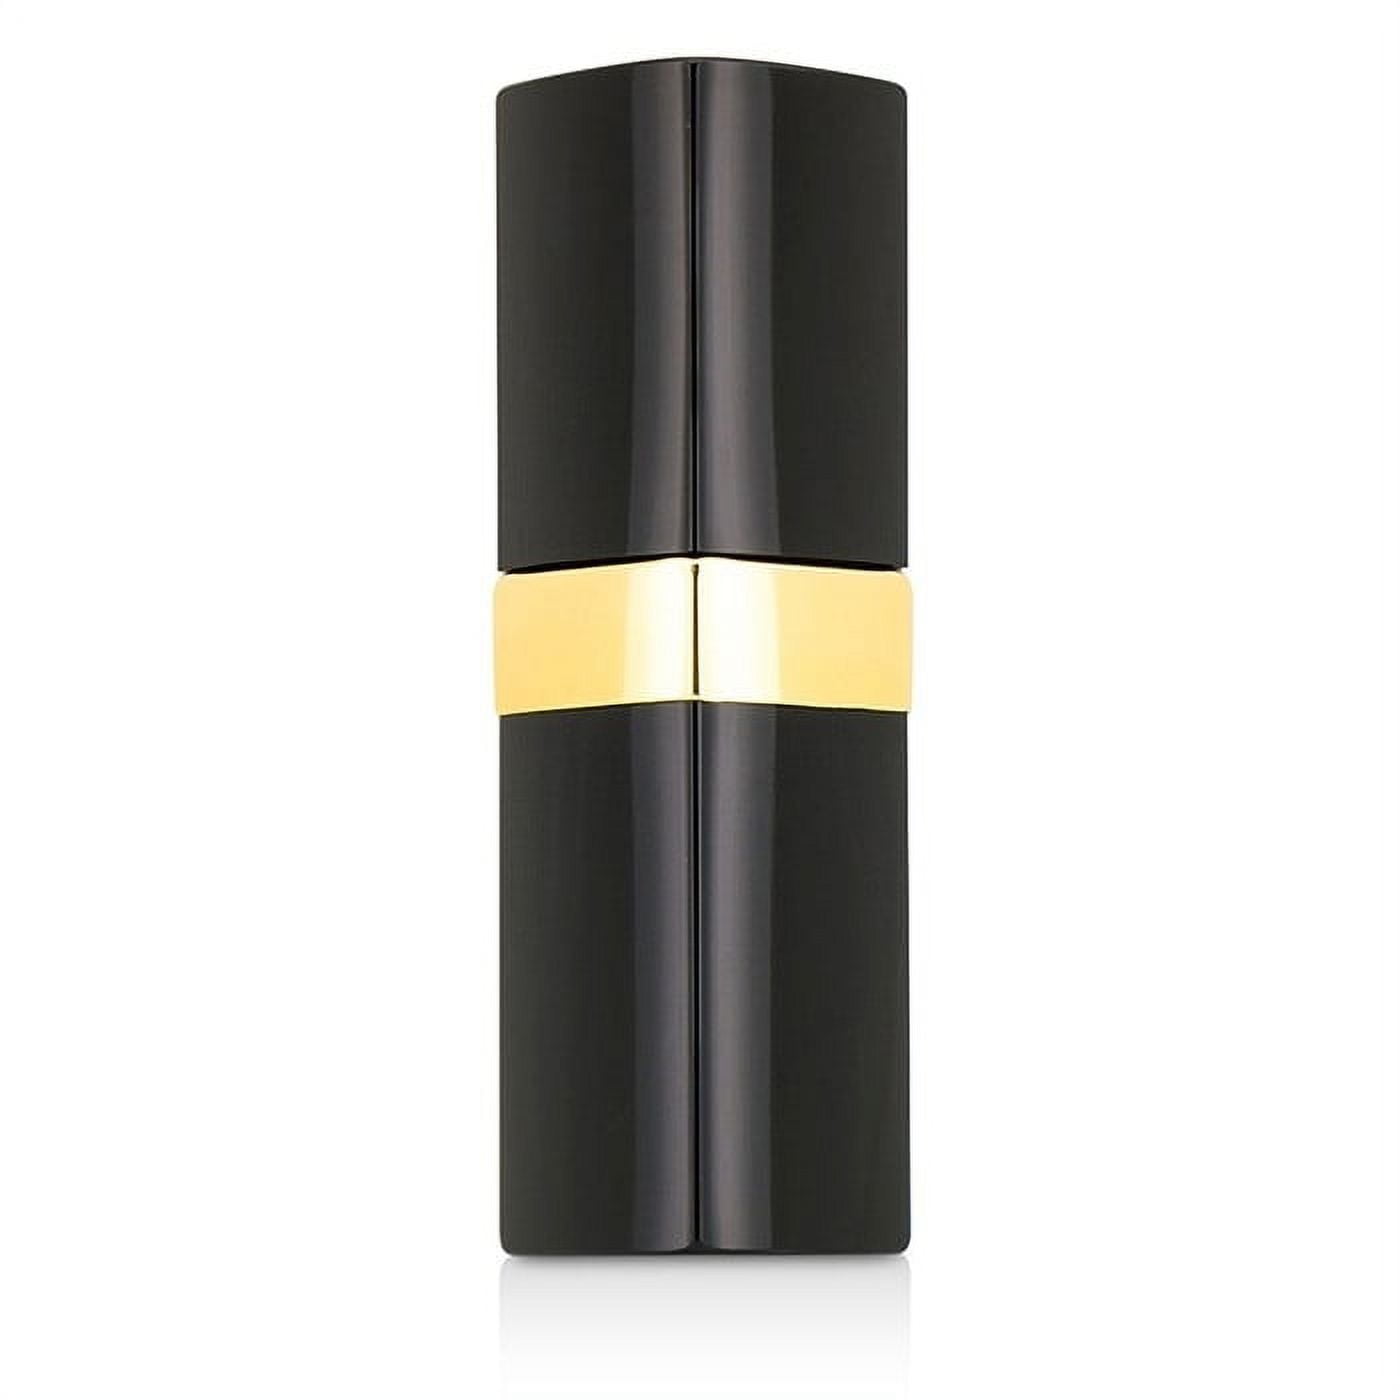 Chanel Rouge Coco Ultra Hydrating Lip Colour - 434 Mademoiselle by Chanel  for Women - 0.12 oz Lipstick